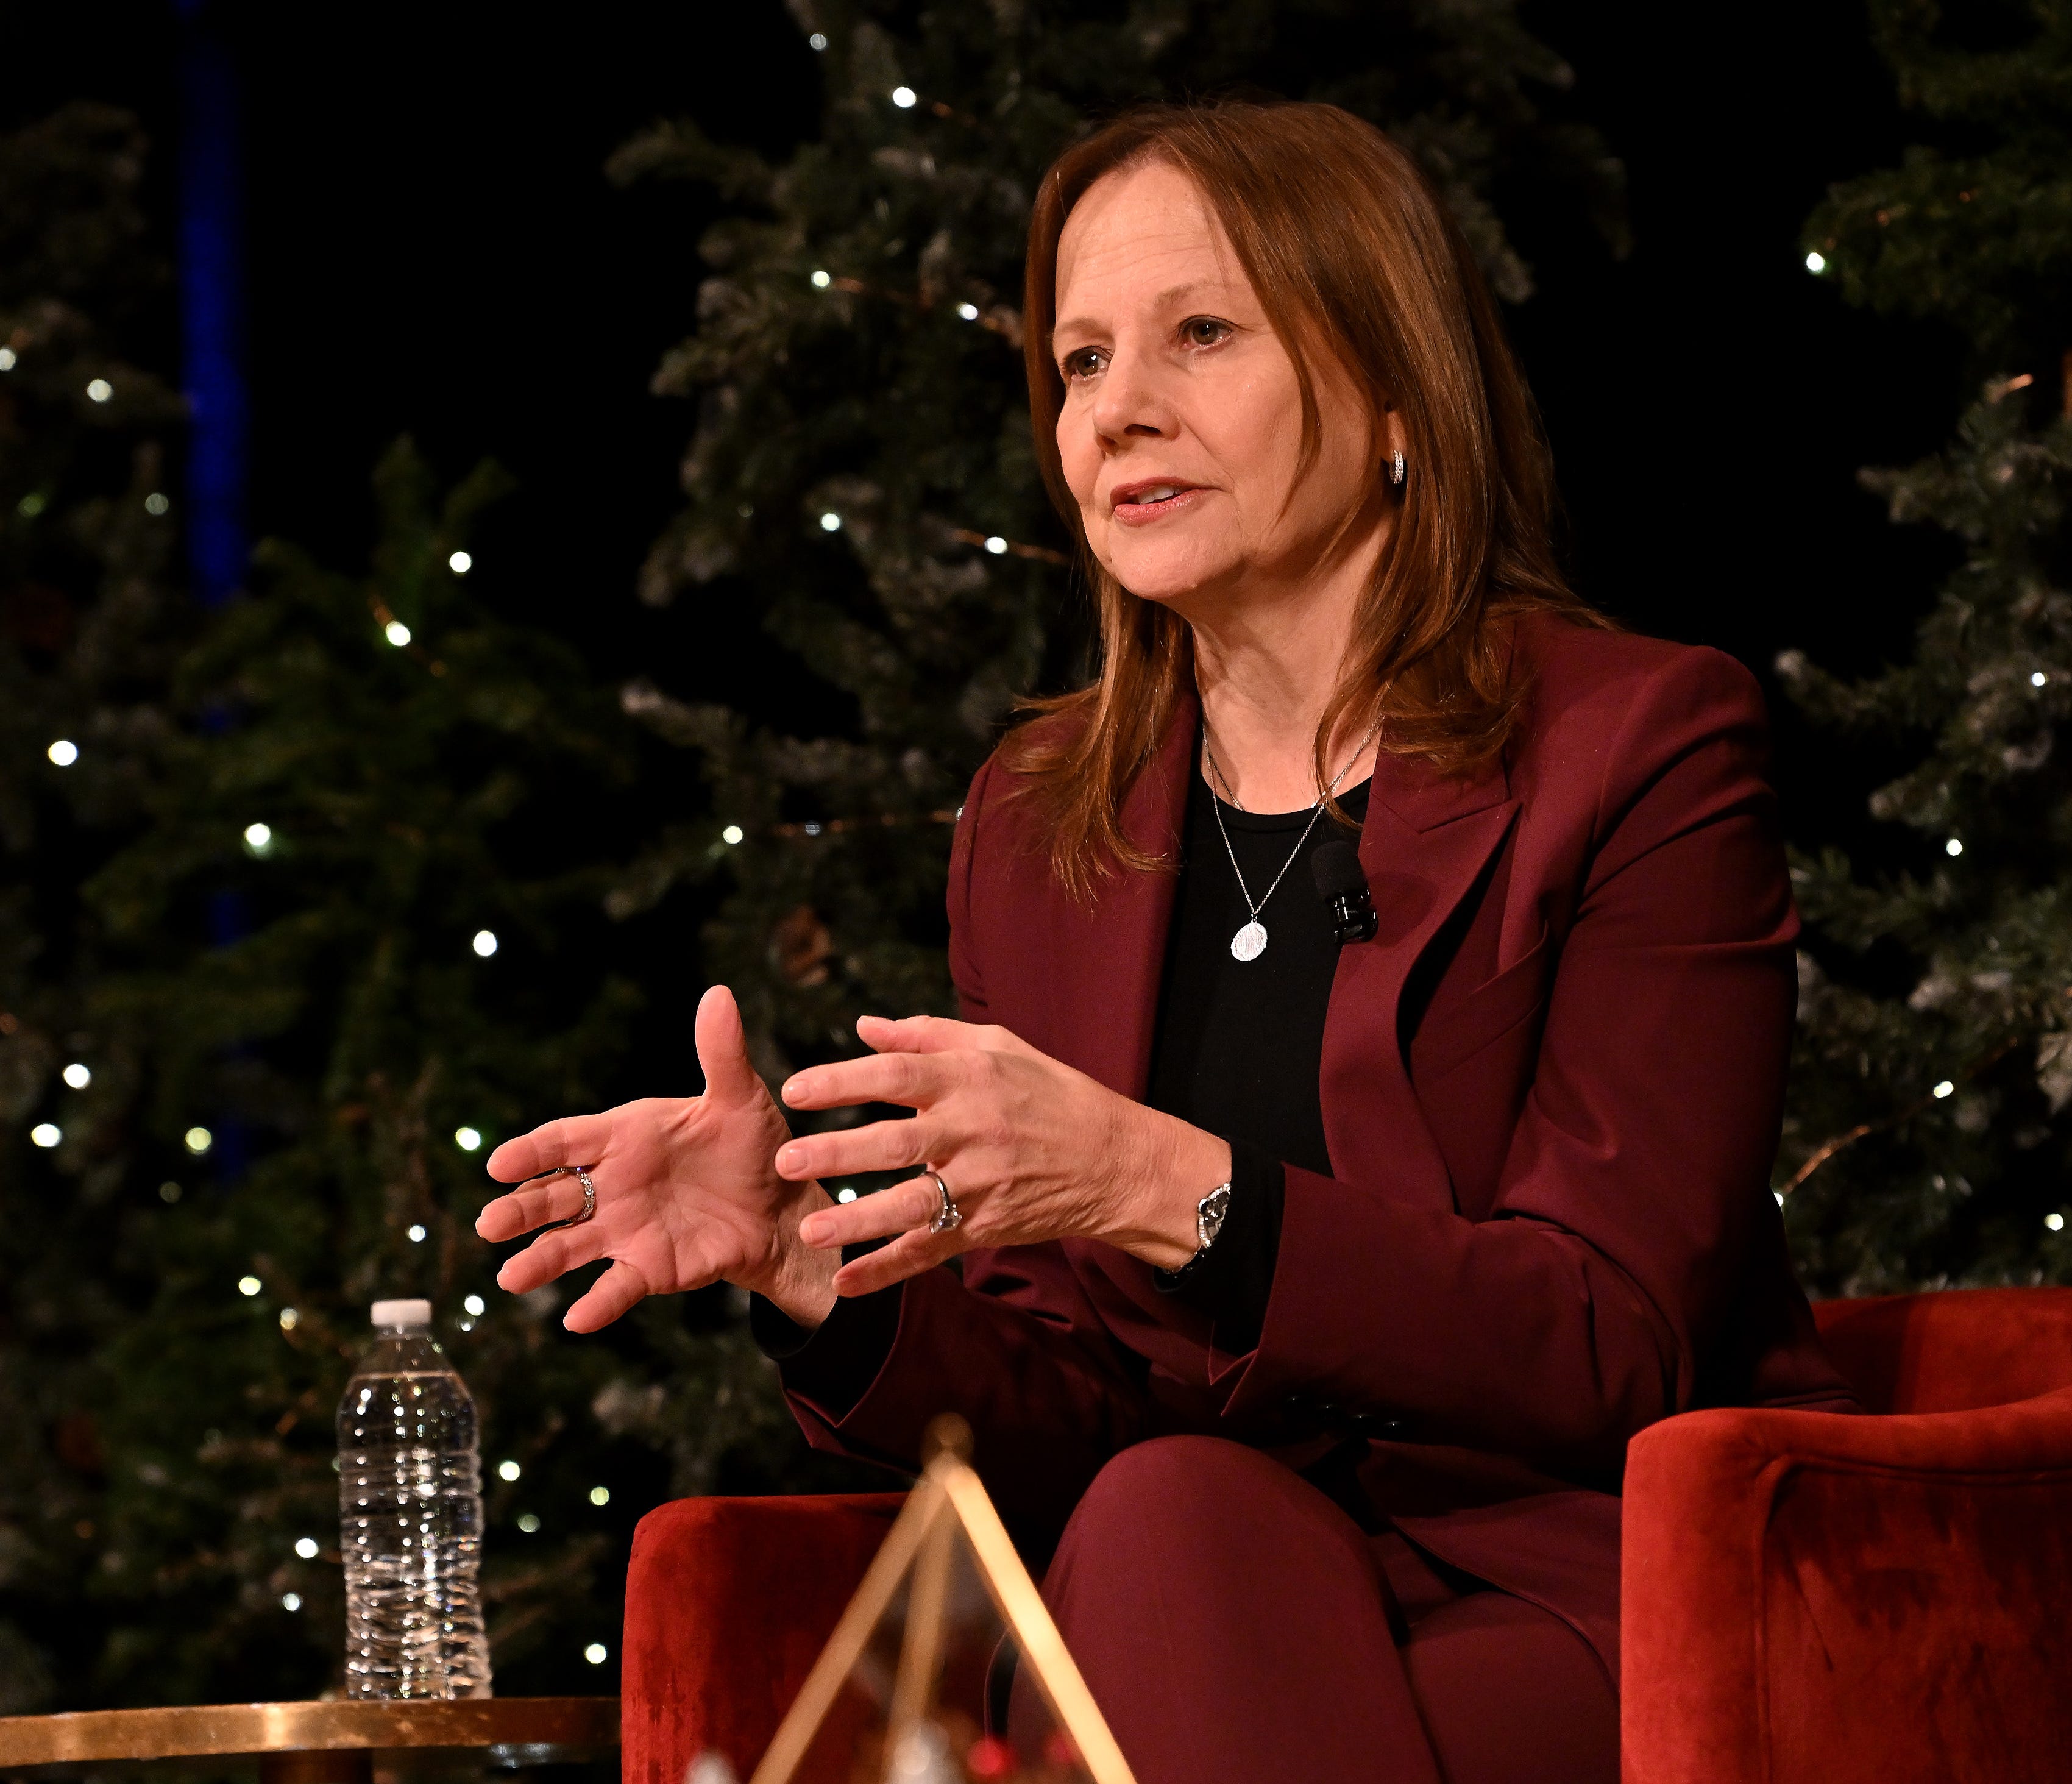 General Motors Co. CEO Mary Barra's $27.8 million compensation for last year ranks her the No. 2 among the Detroit Three CEOs.